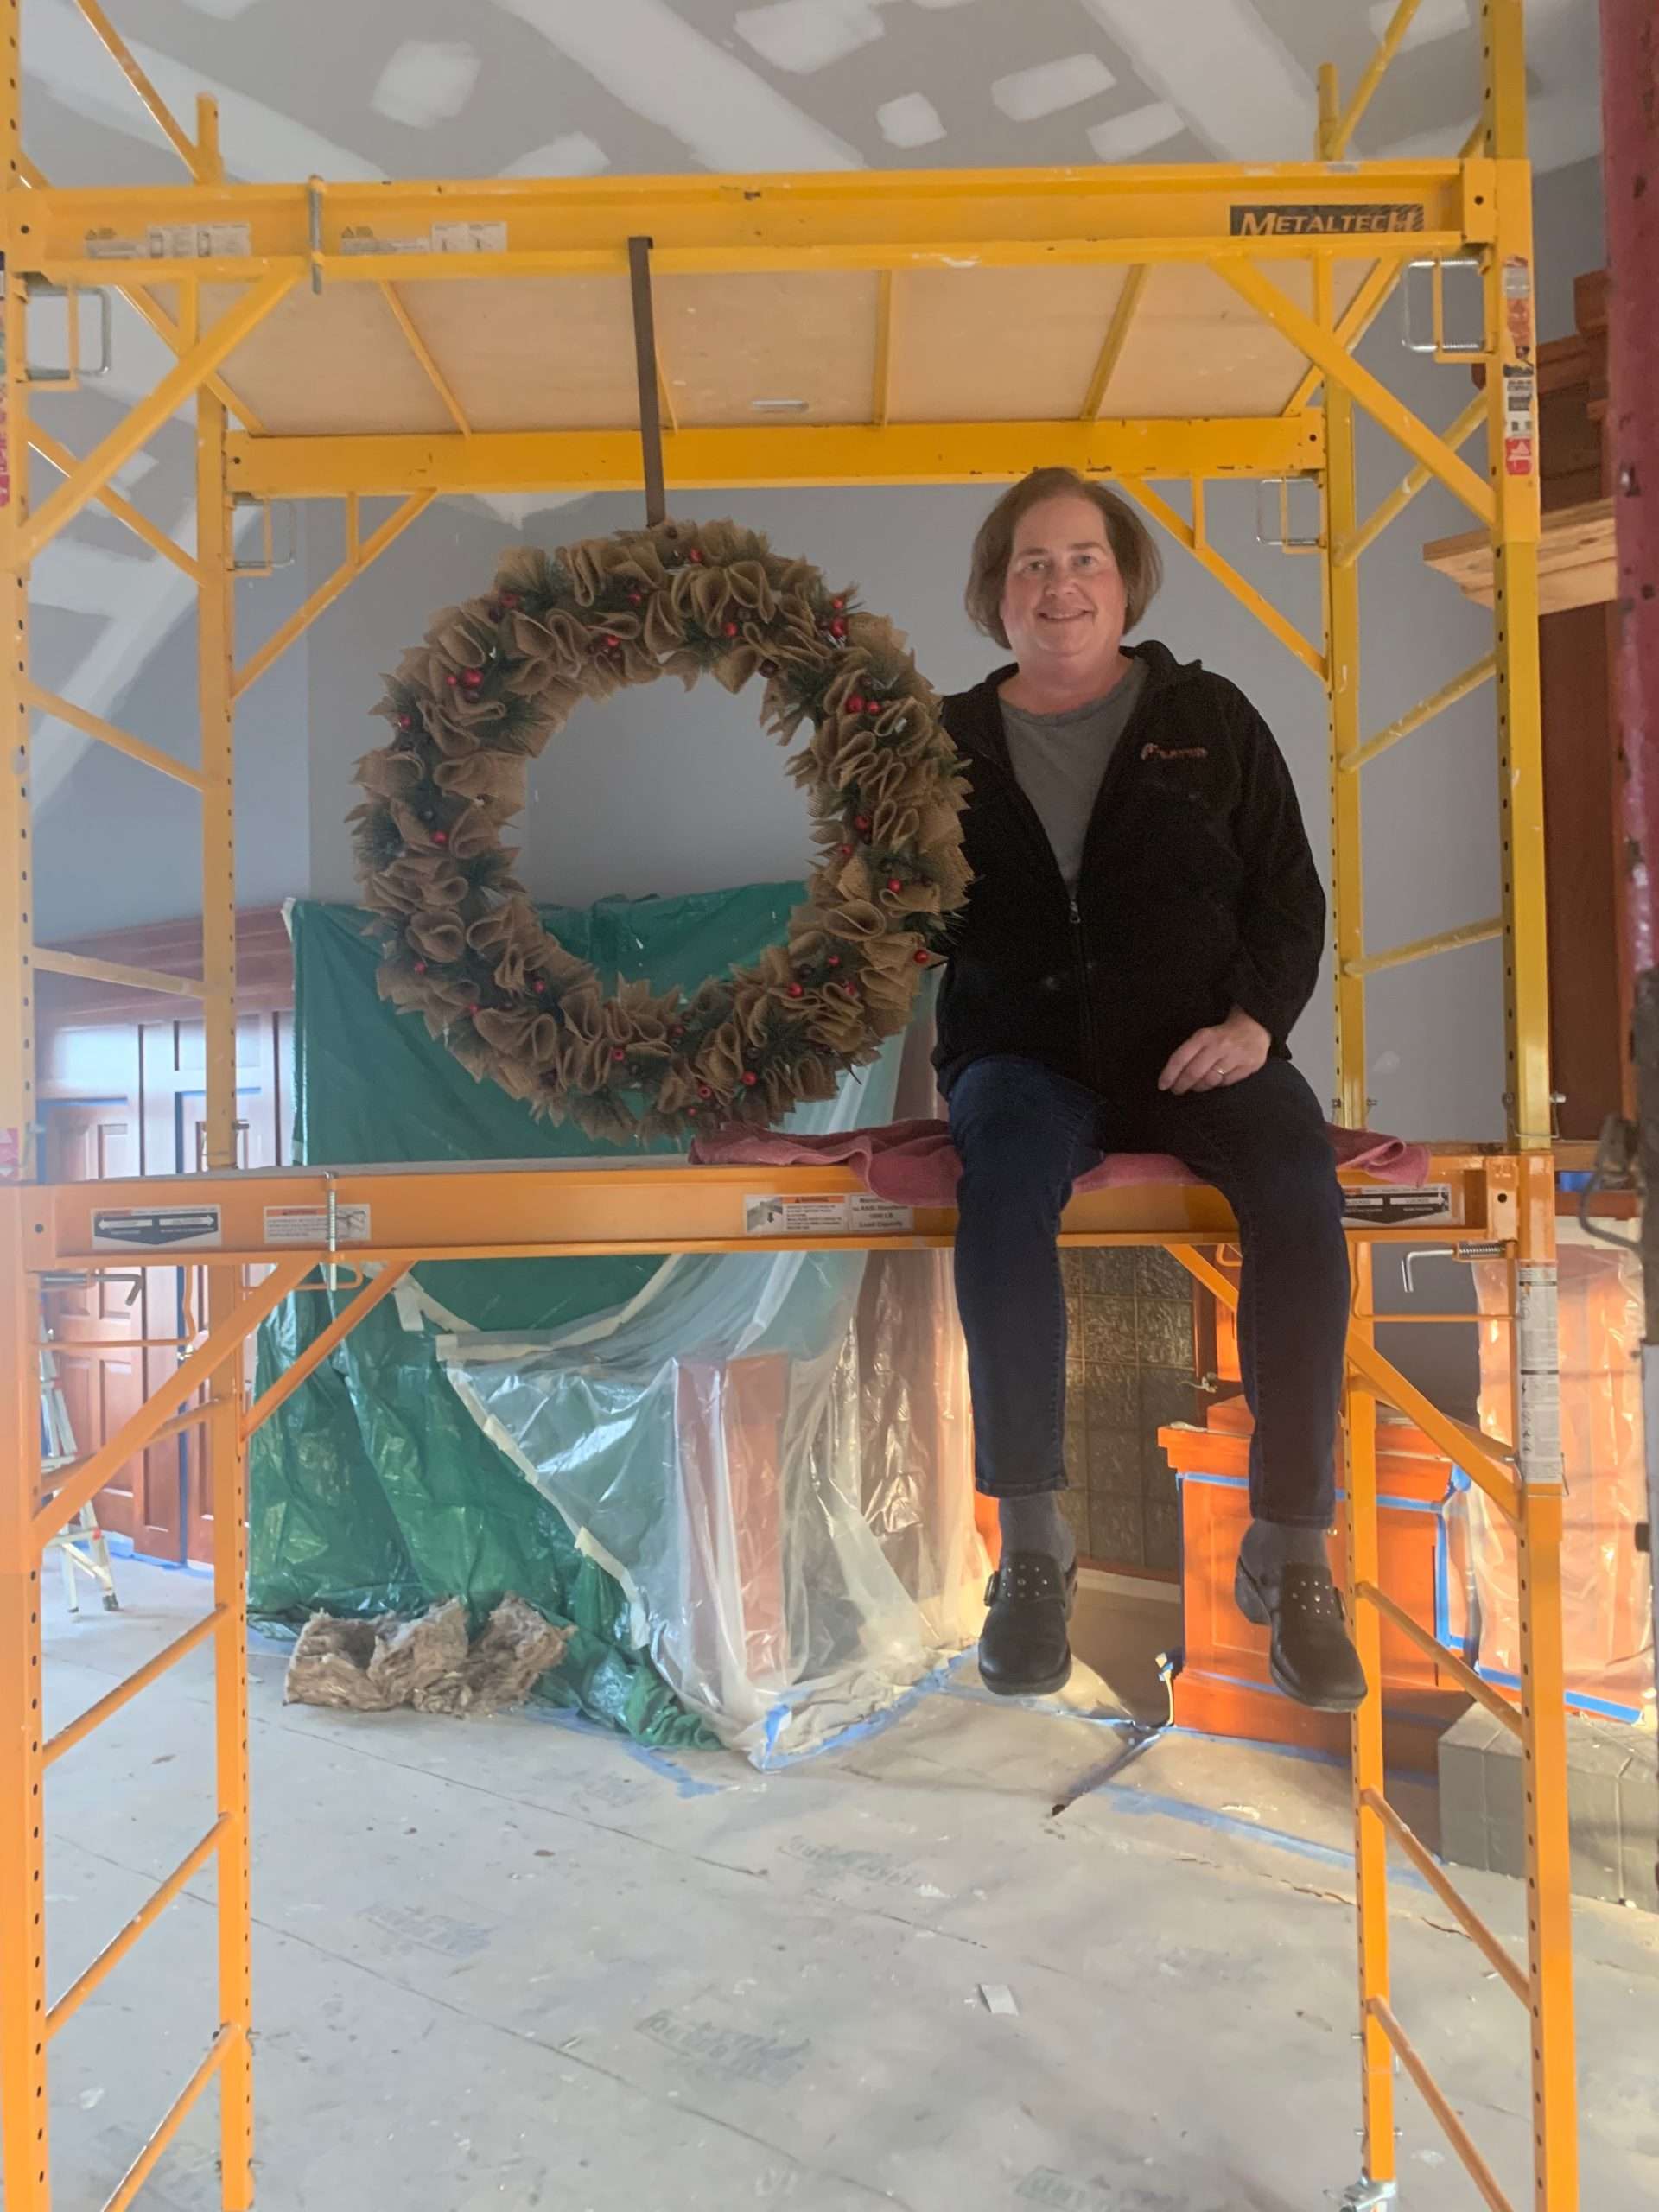 Mary Rodman, Christian Author & Speaker during a remodel project at their home. Christmas 2019.